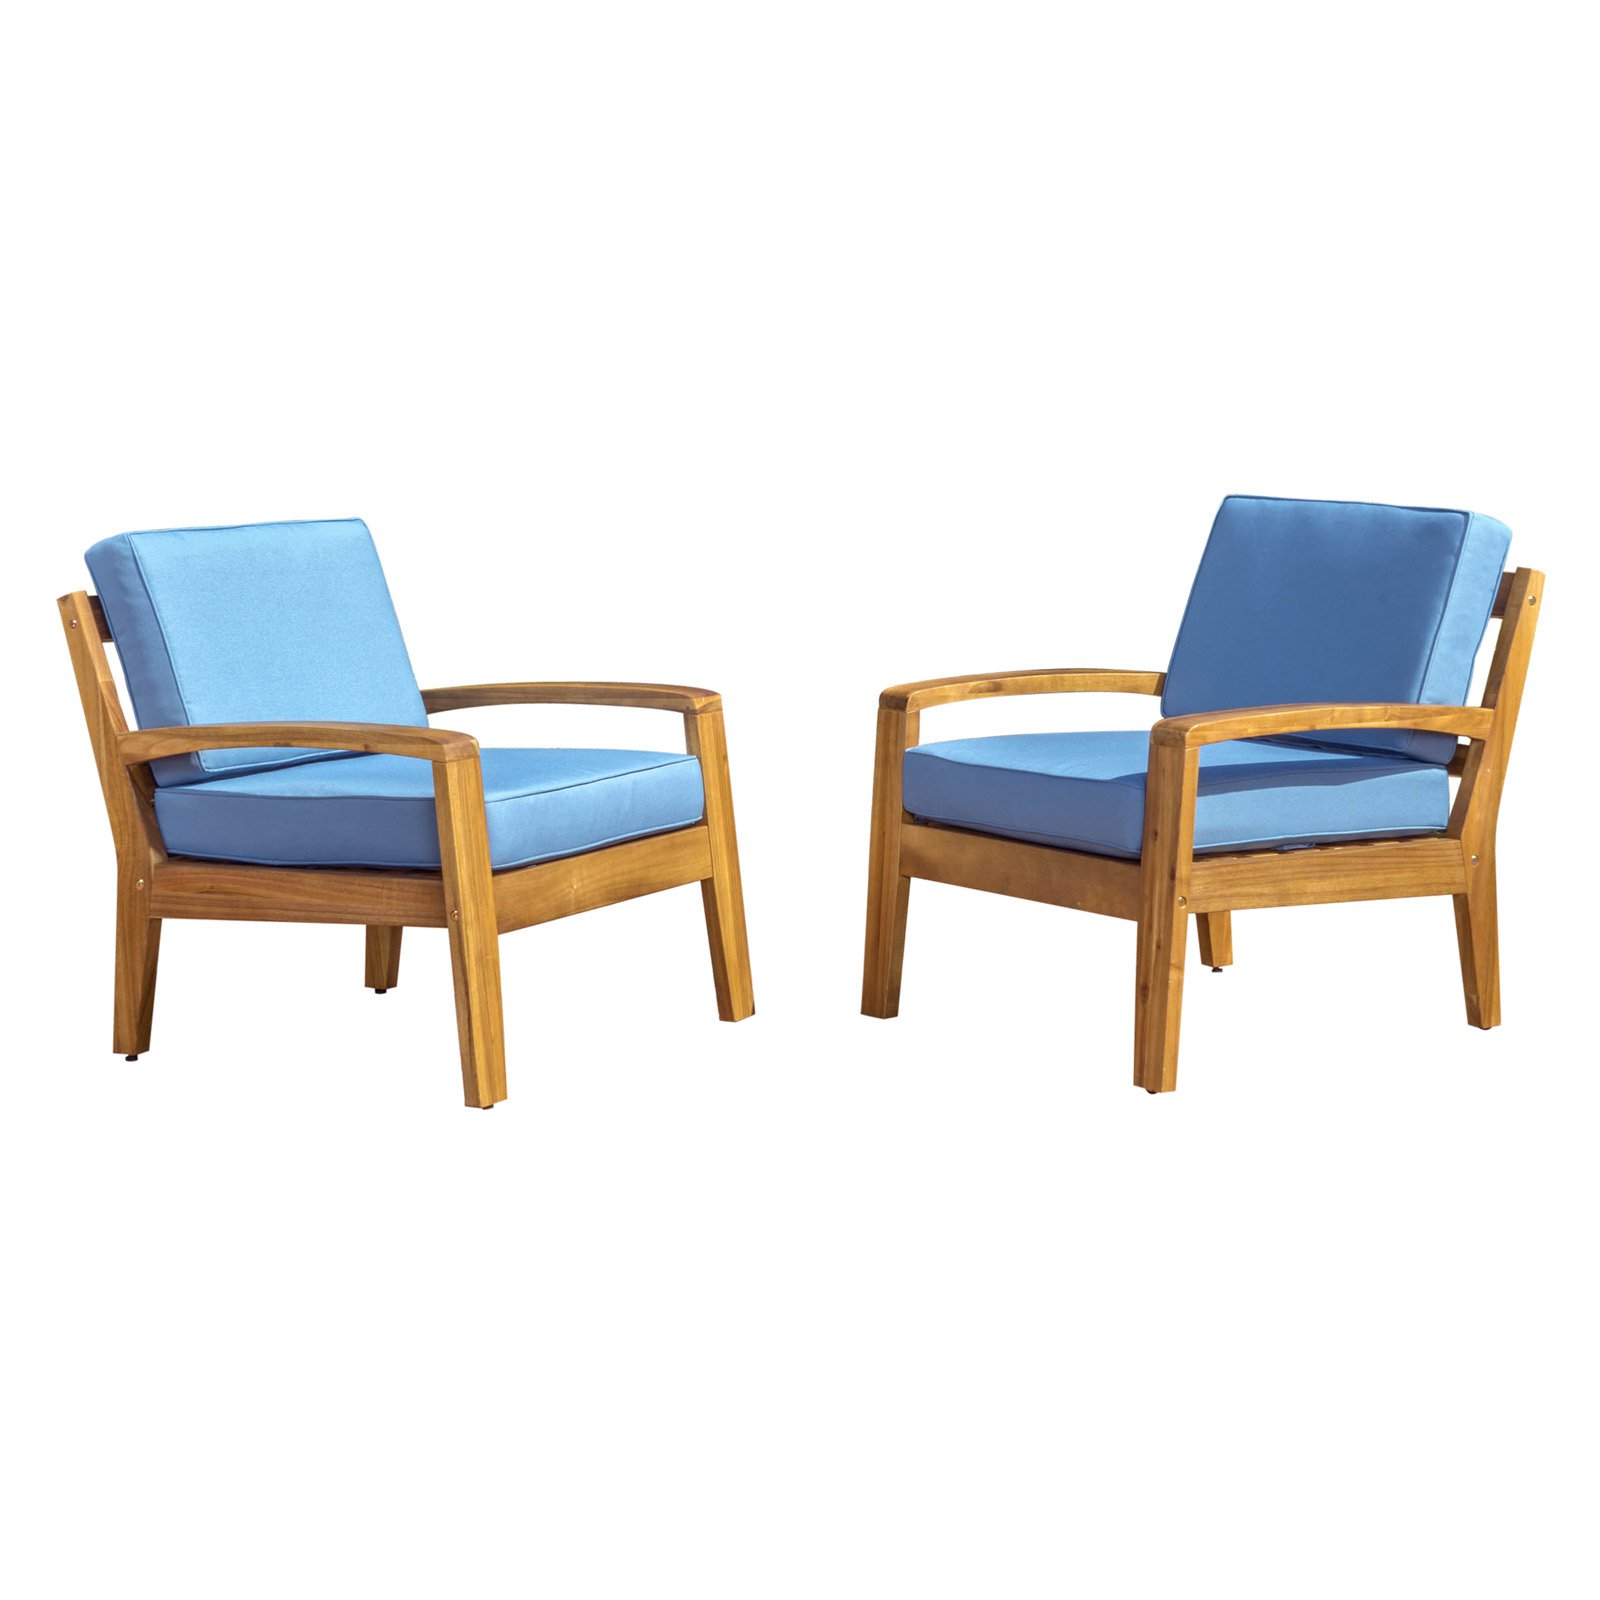 Gorlomi Wooden Patio Club Chairs with Cushions - image 1 of 6